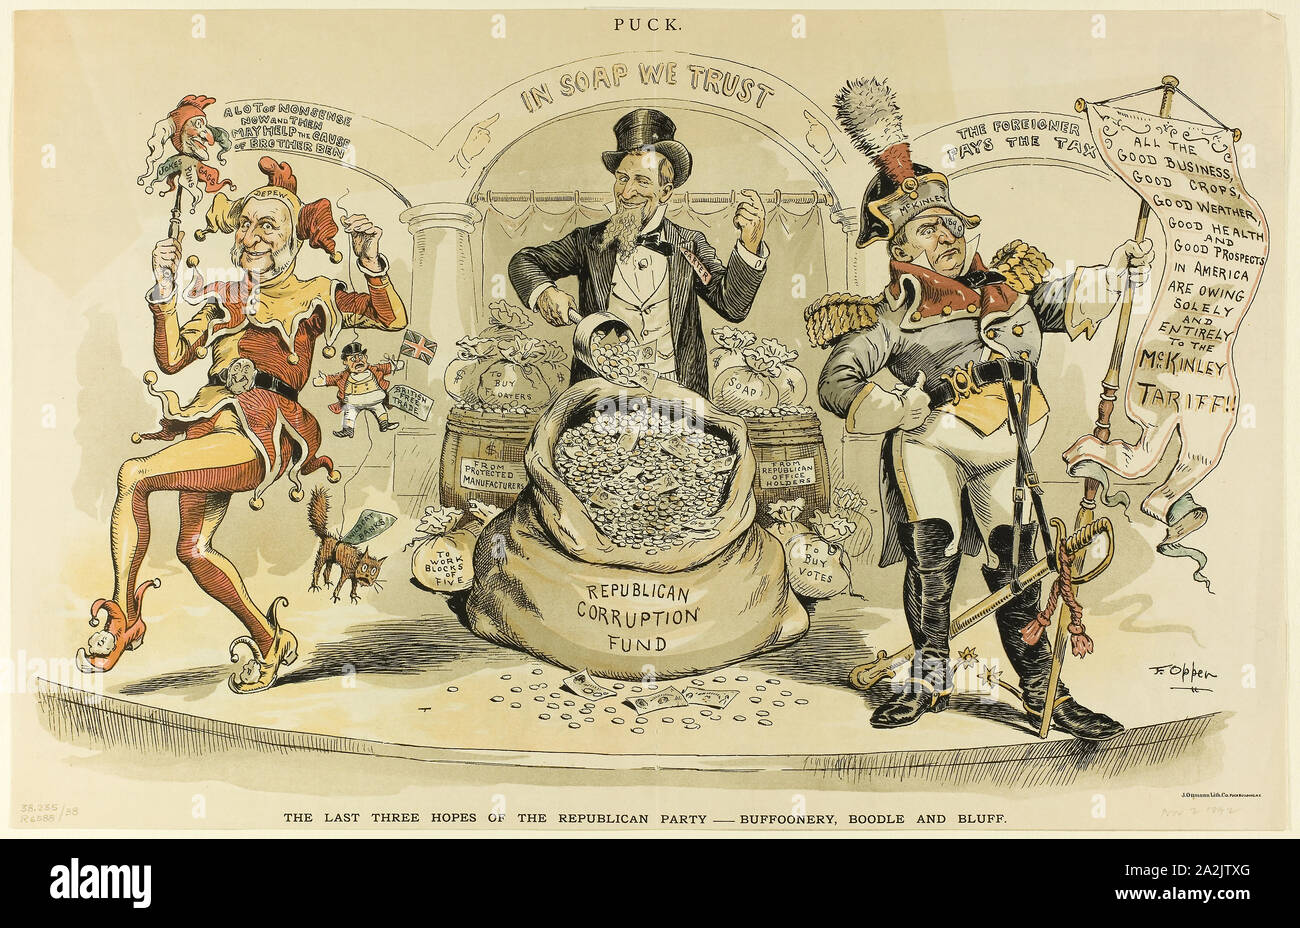 The Last Three Hopes of the Republican Party, from Puck, 1892, Frederick Burr Opper, American, 1857-1937, United States, Color lithograph on newsprint, 308 x 480 mm Stock Photo